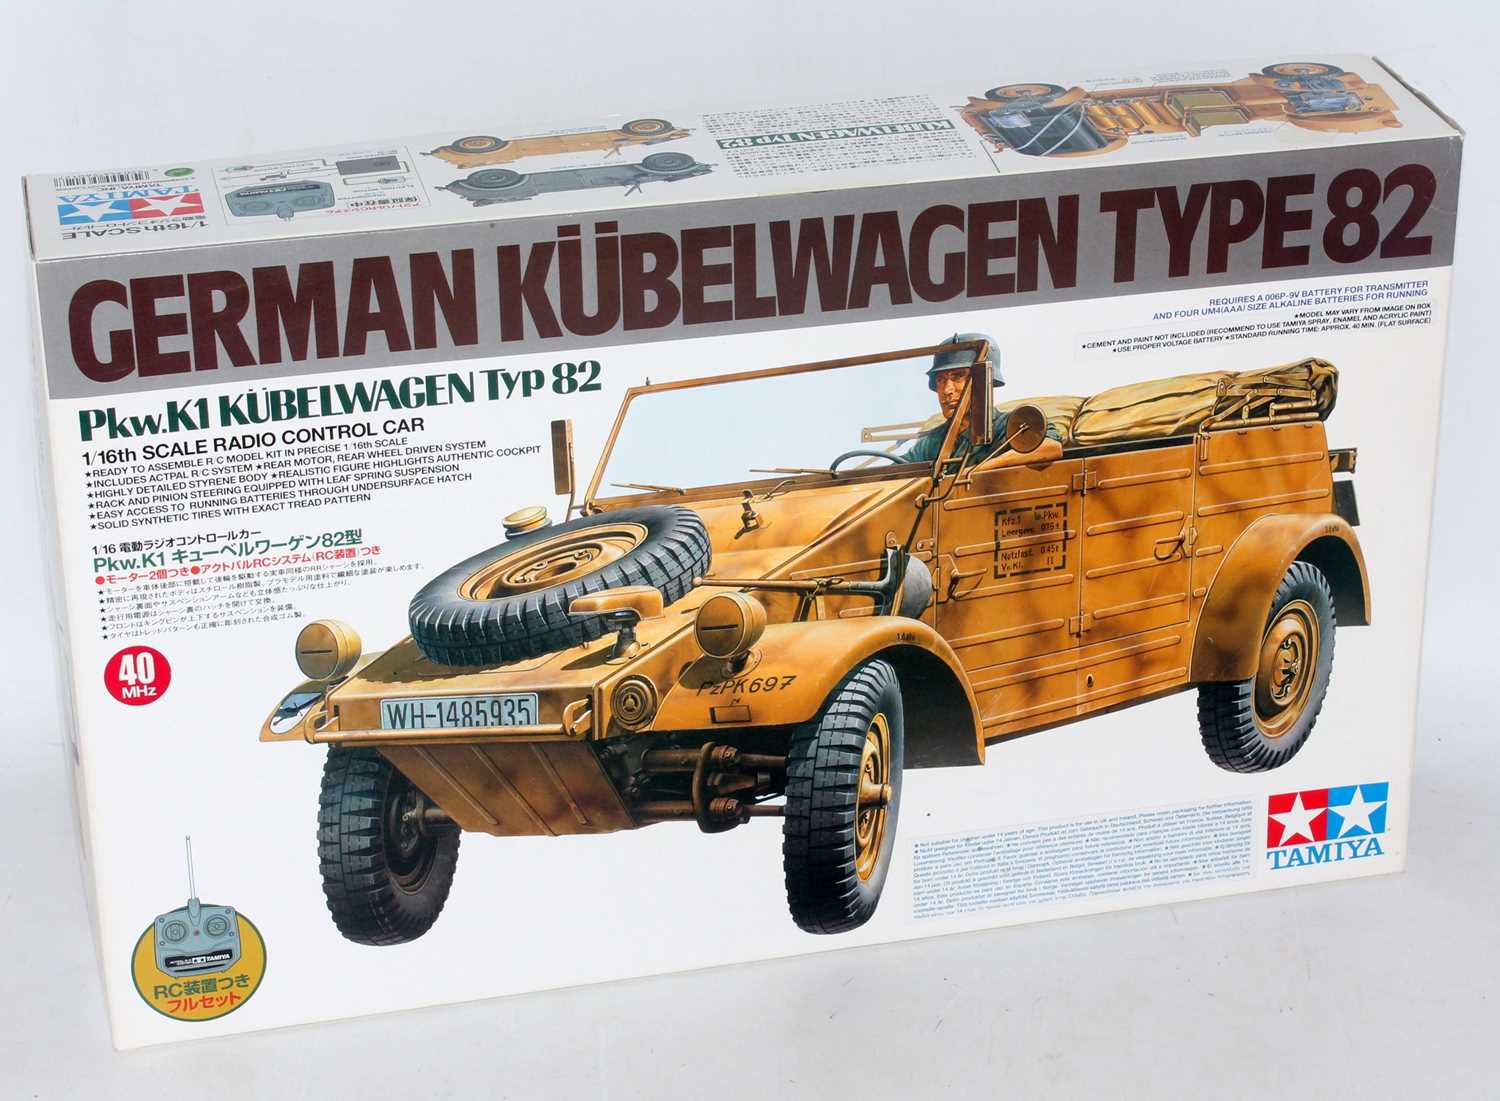 A Tamiya model No. 56012 rare 1/16 scale radio controlled model of a Kubelwagen type 82 military